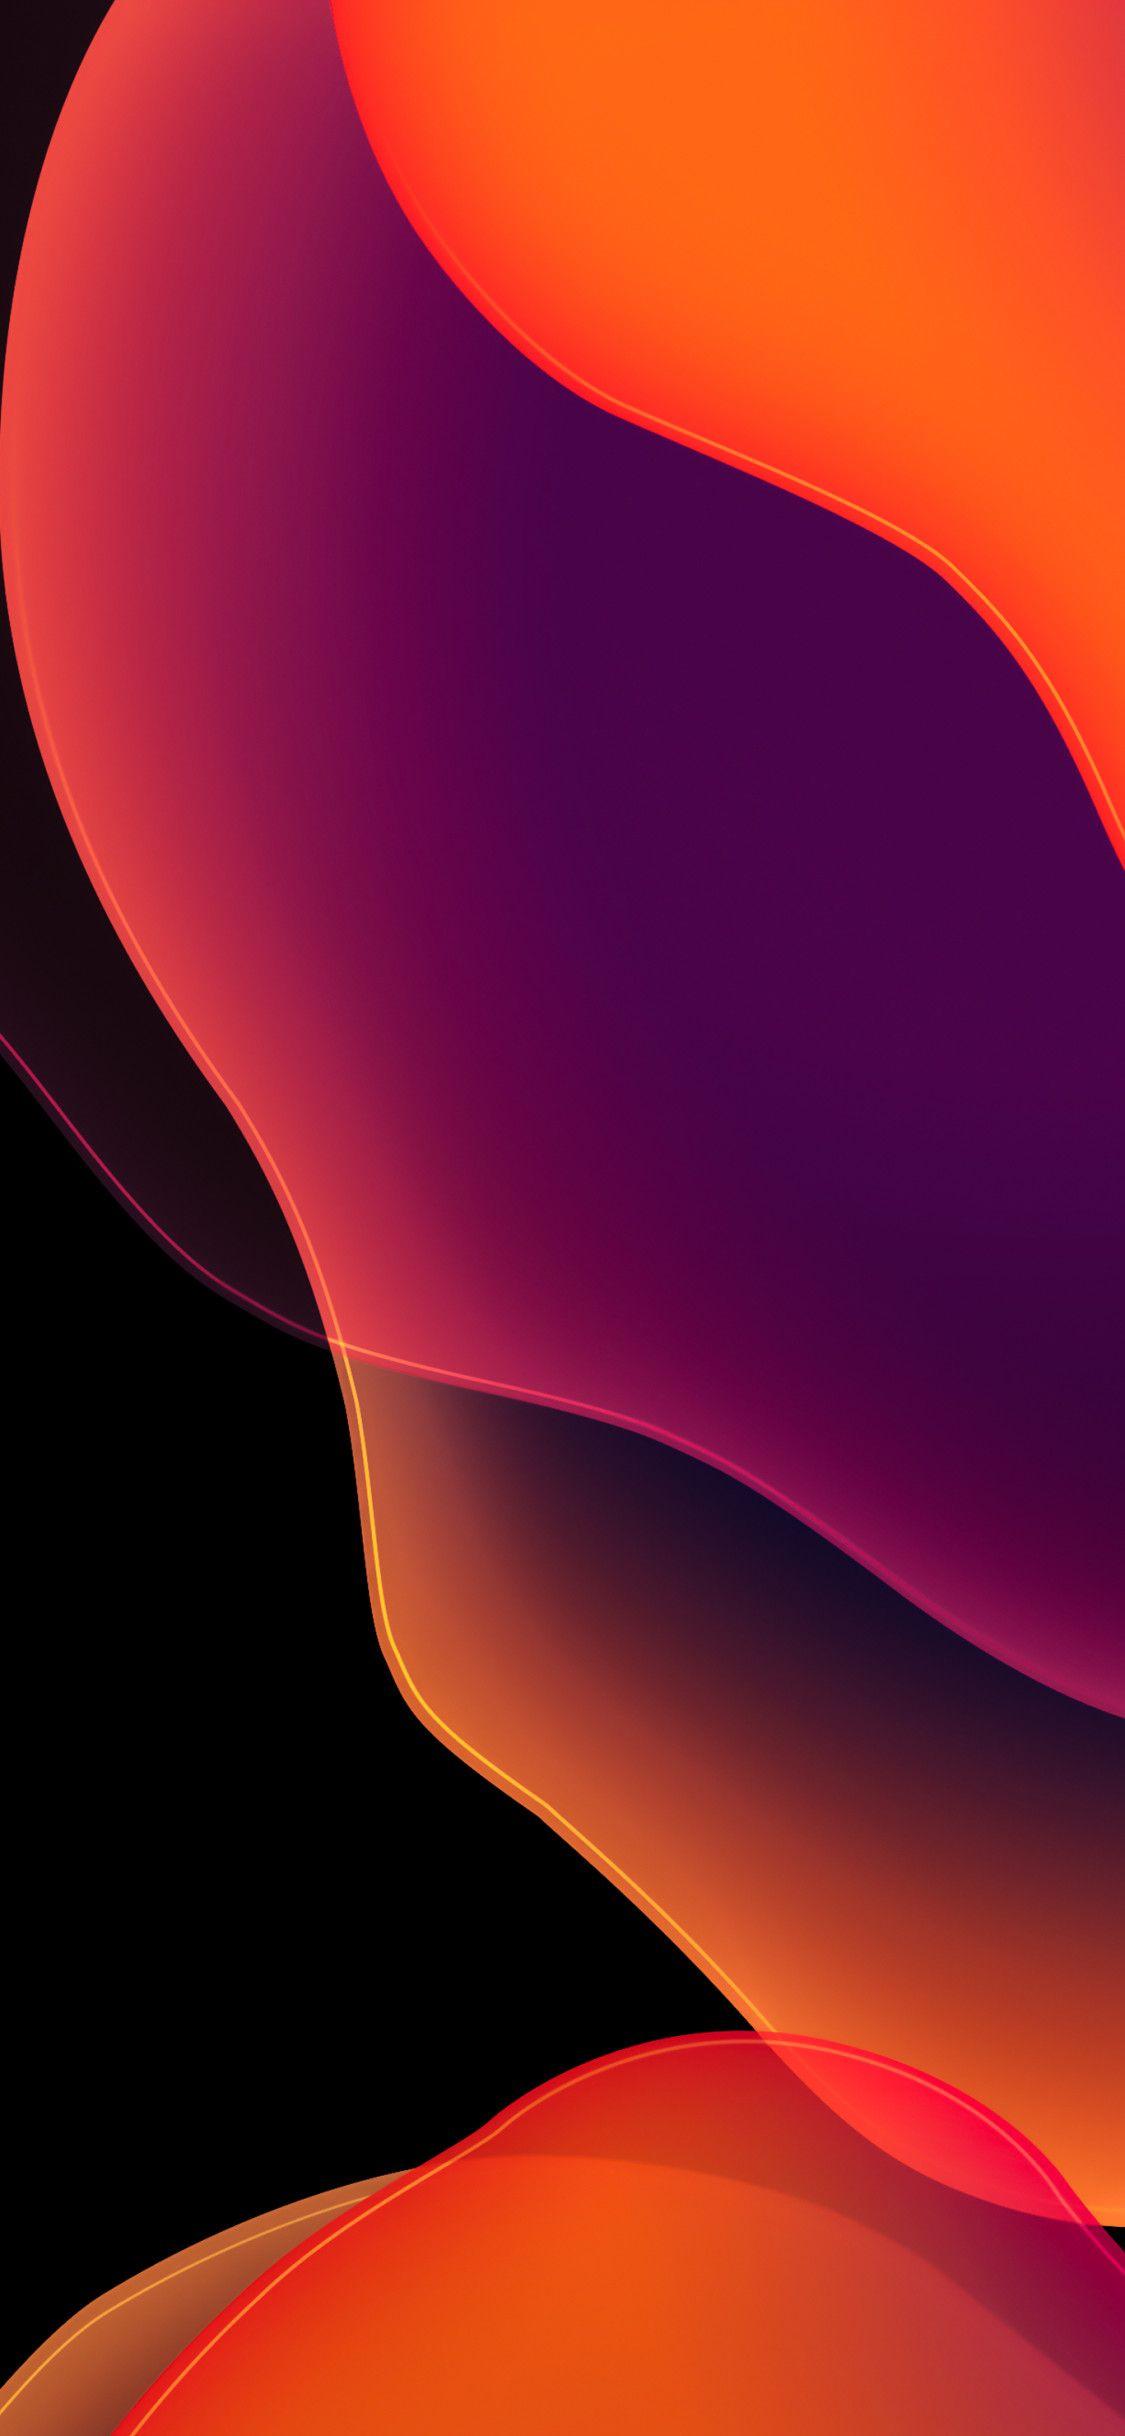 iPhone X Abstract Wallpapers - Top Free iPhone X Abstract Backgrounds ...